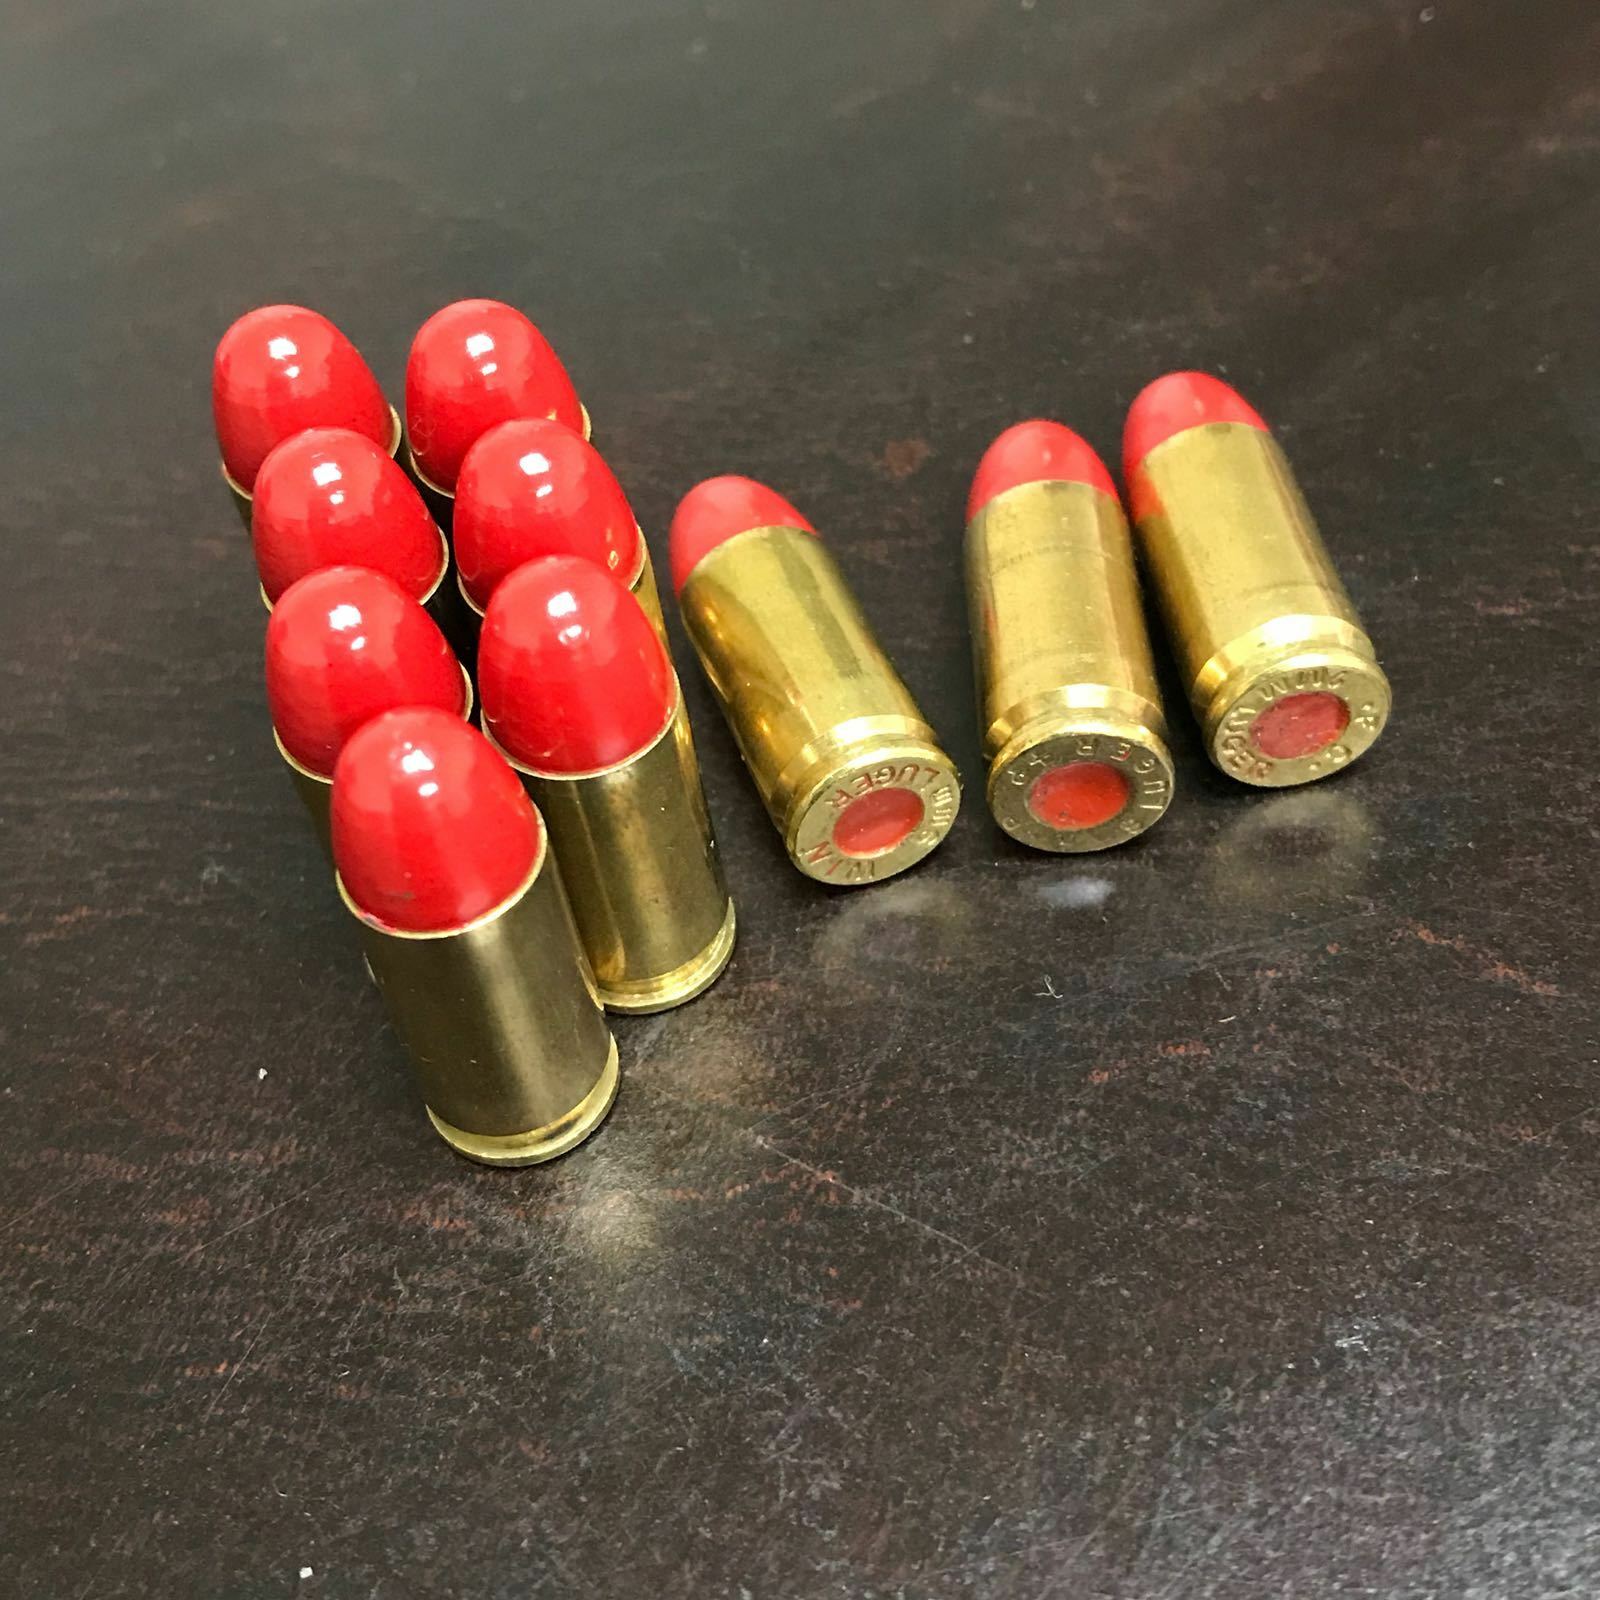 9mm Luger Snap Caps Smooth Red Bullets Dummy Training Rounds Set Of 10